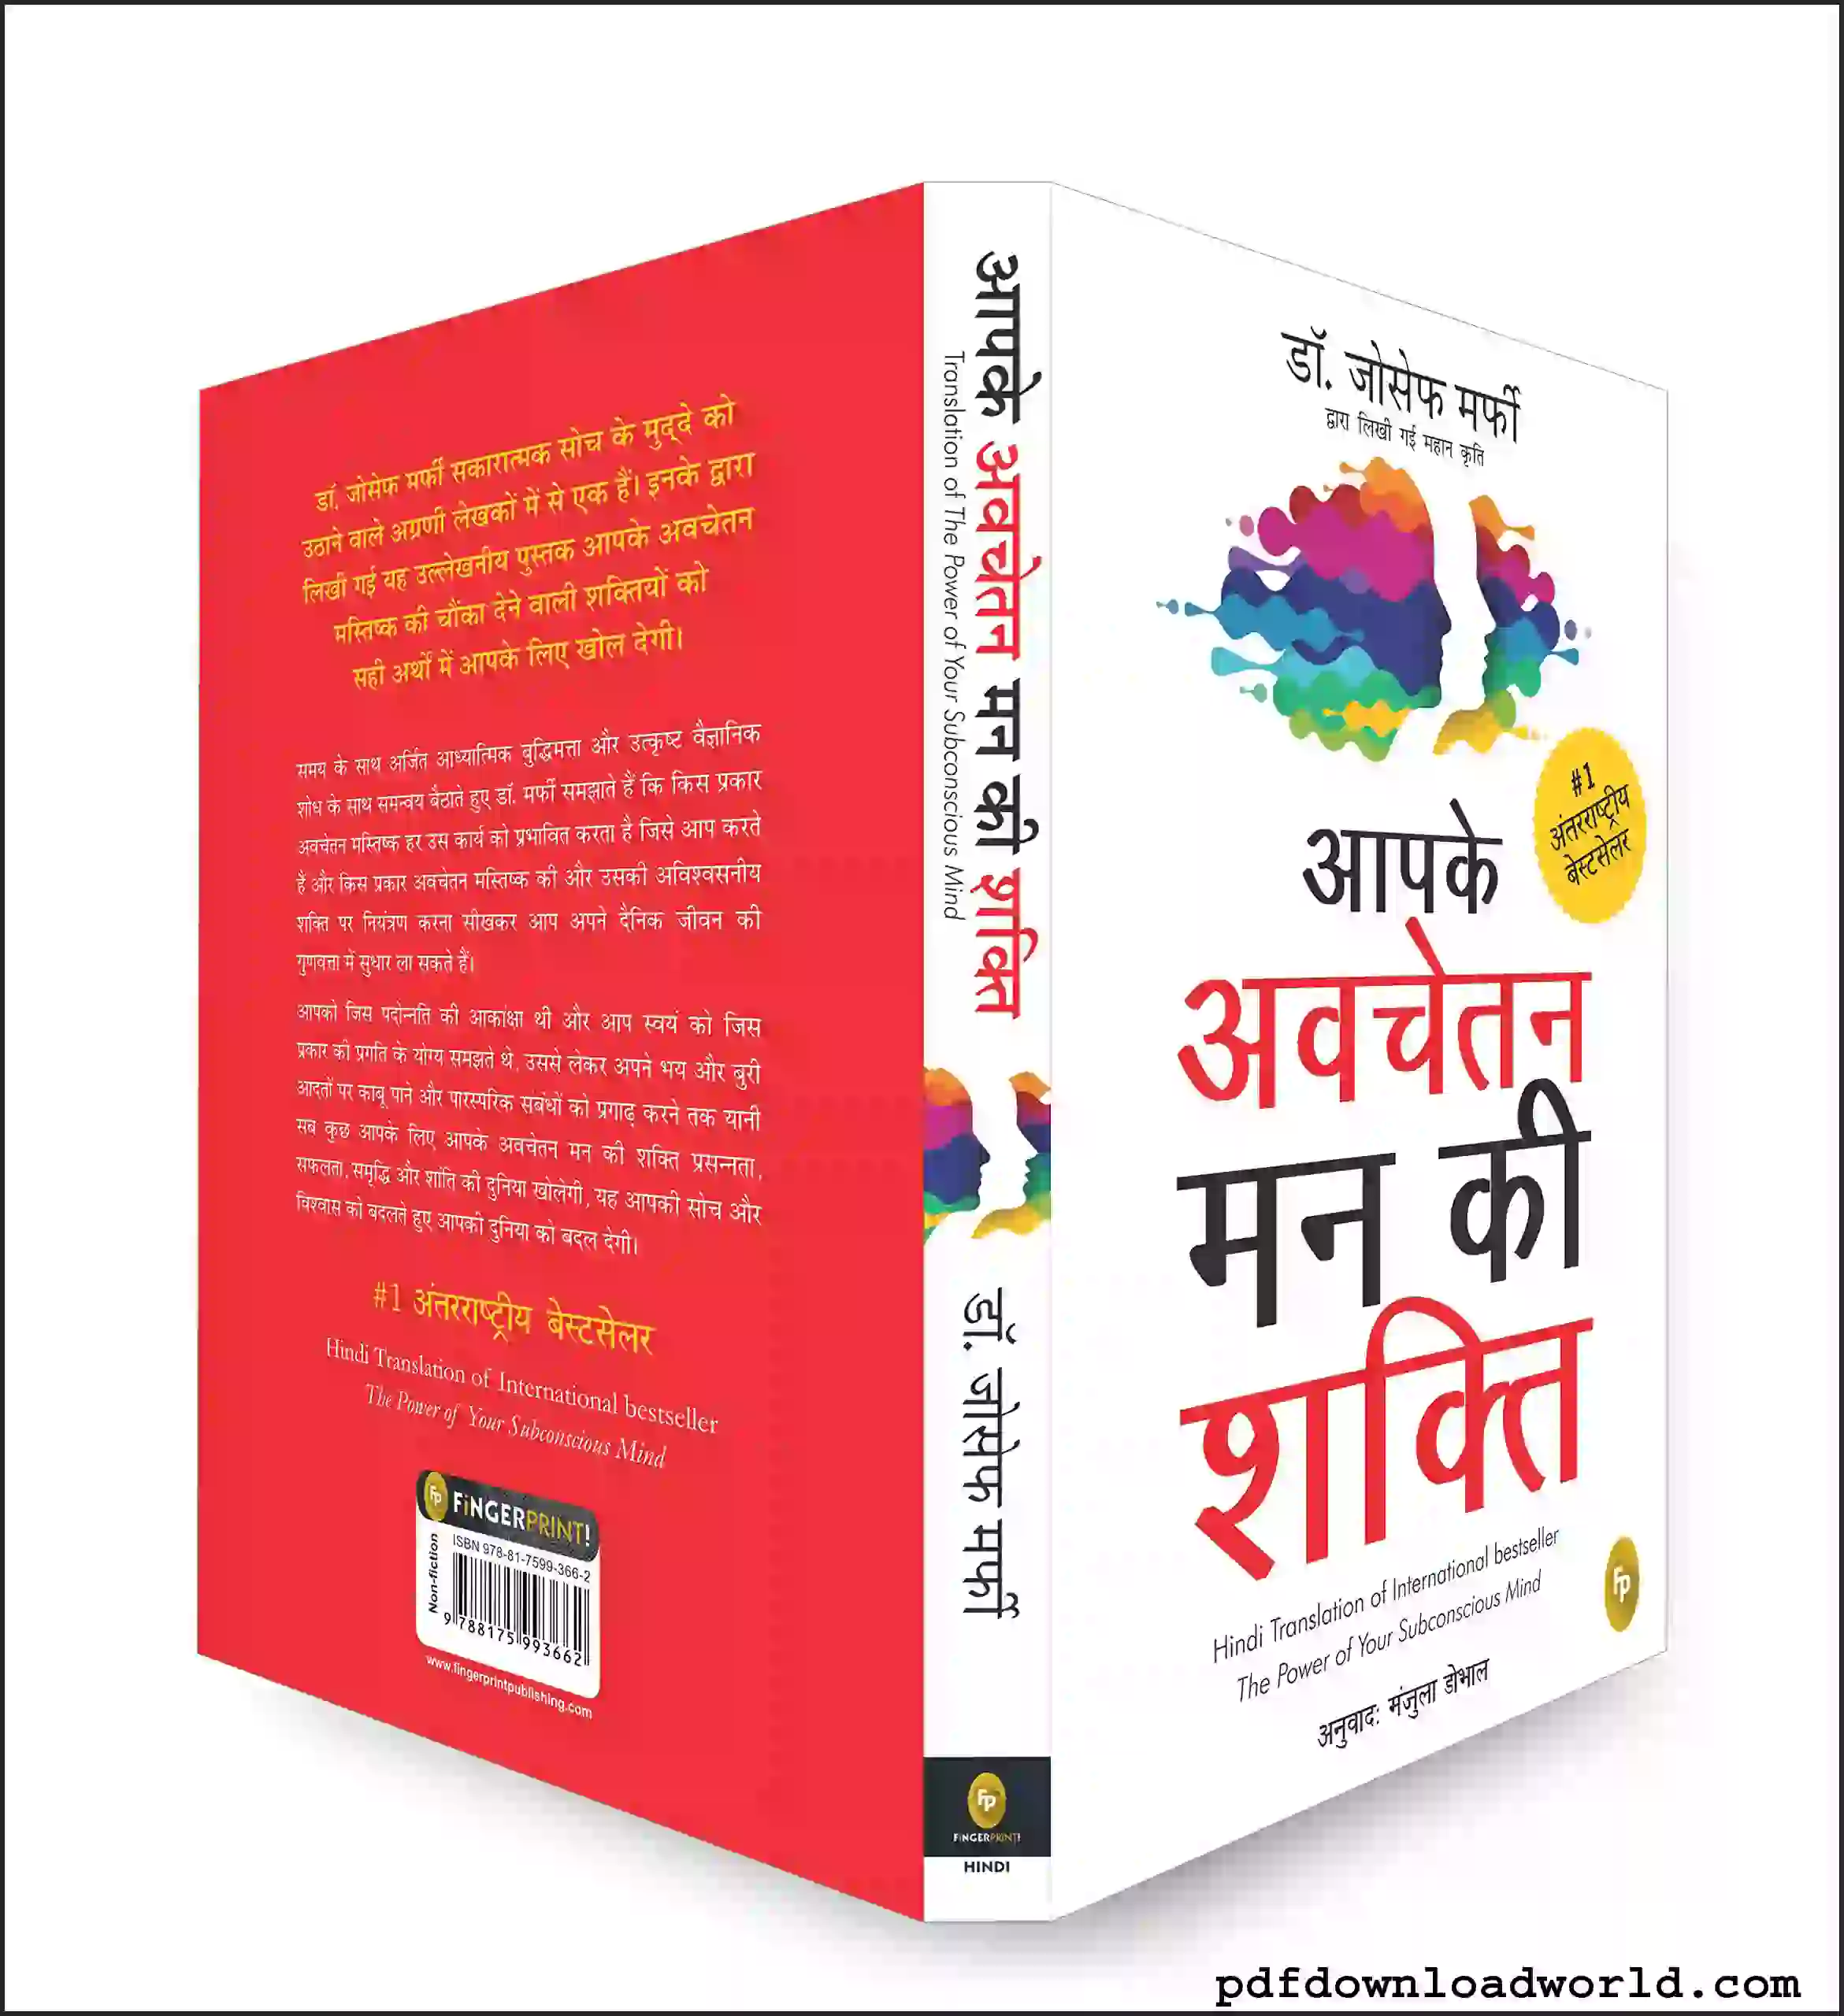 The Power Of Your Subconscious Mind In Hindi PDF, The Power Of Your Subconscious Mind PDF, The Power Of Your Subconscious Mind PDF Download, Power Of Subconscious Mind Book PDF, Power Of Your Subconscious Mind PDF,The Power Of Your Subconscious Mind PDF 